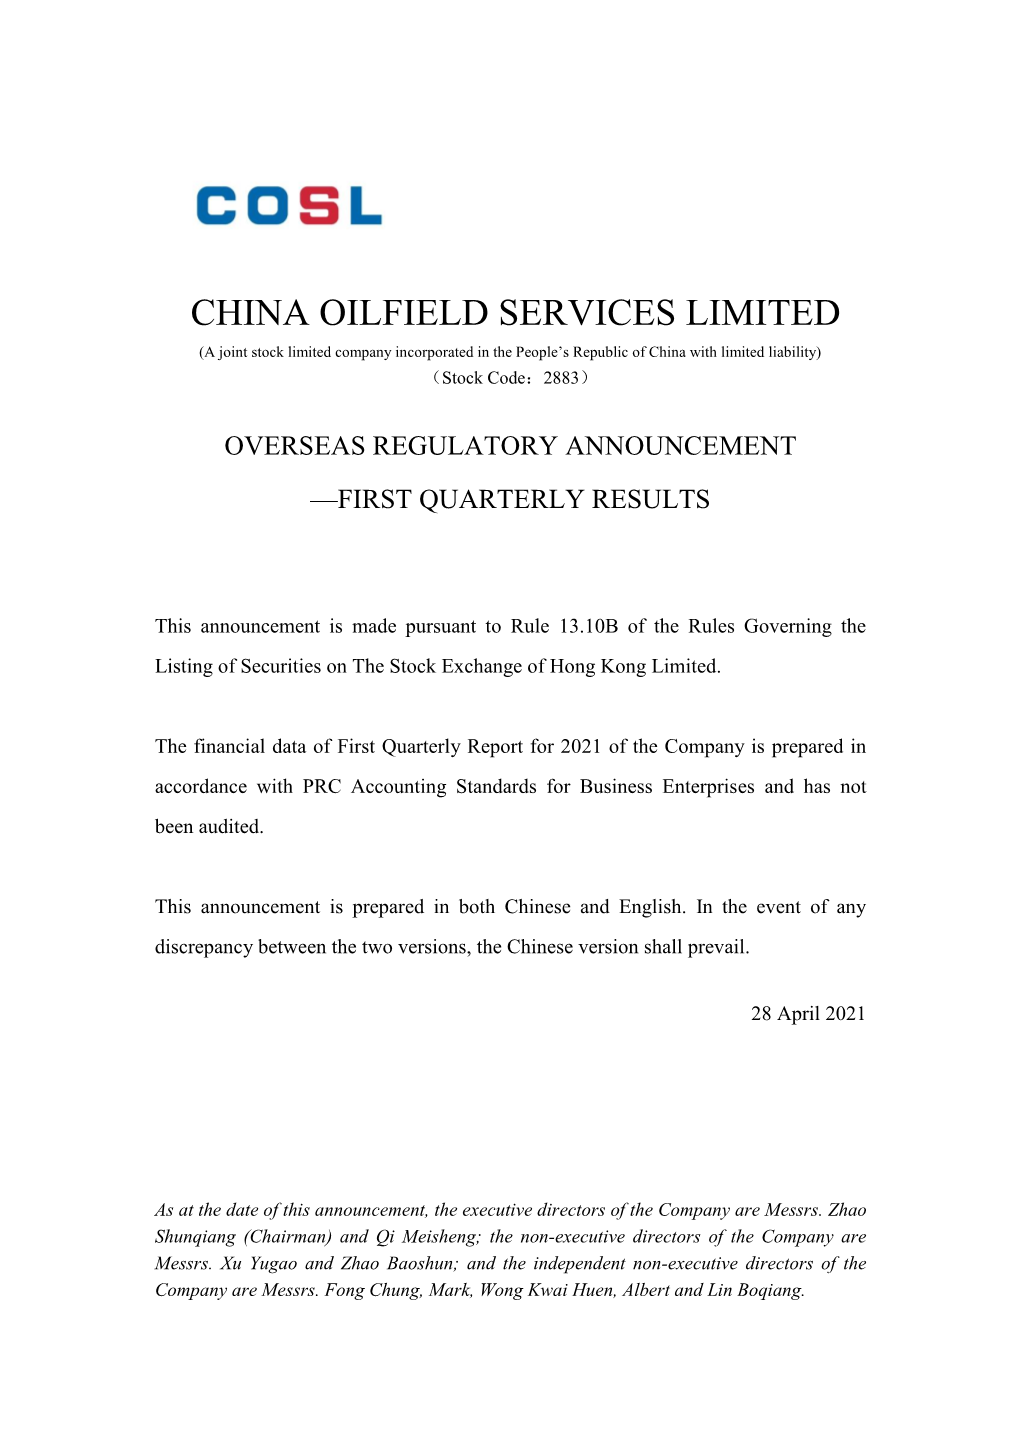 CHINA OILFIELD SERVICES LIMITED (A Joint Stock Limited Company Incorporated in the People’S Republic of China with Limited Liability) （Stock Code：2883）